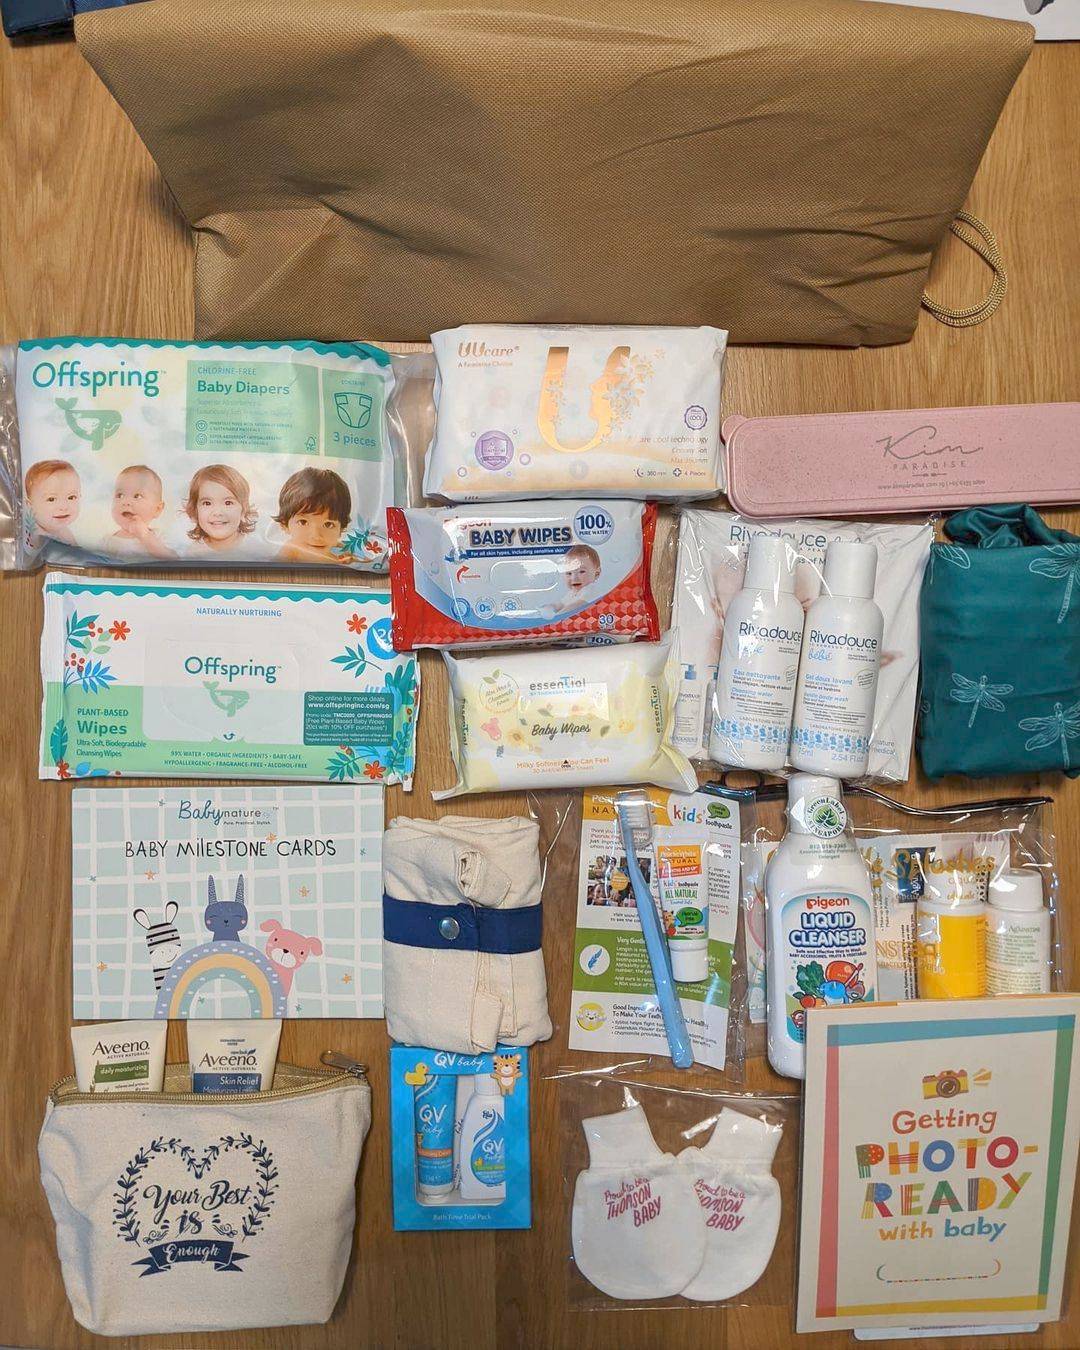 Hospital Bag Checklist: What to Pack for Delivery